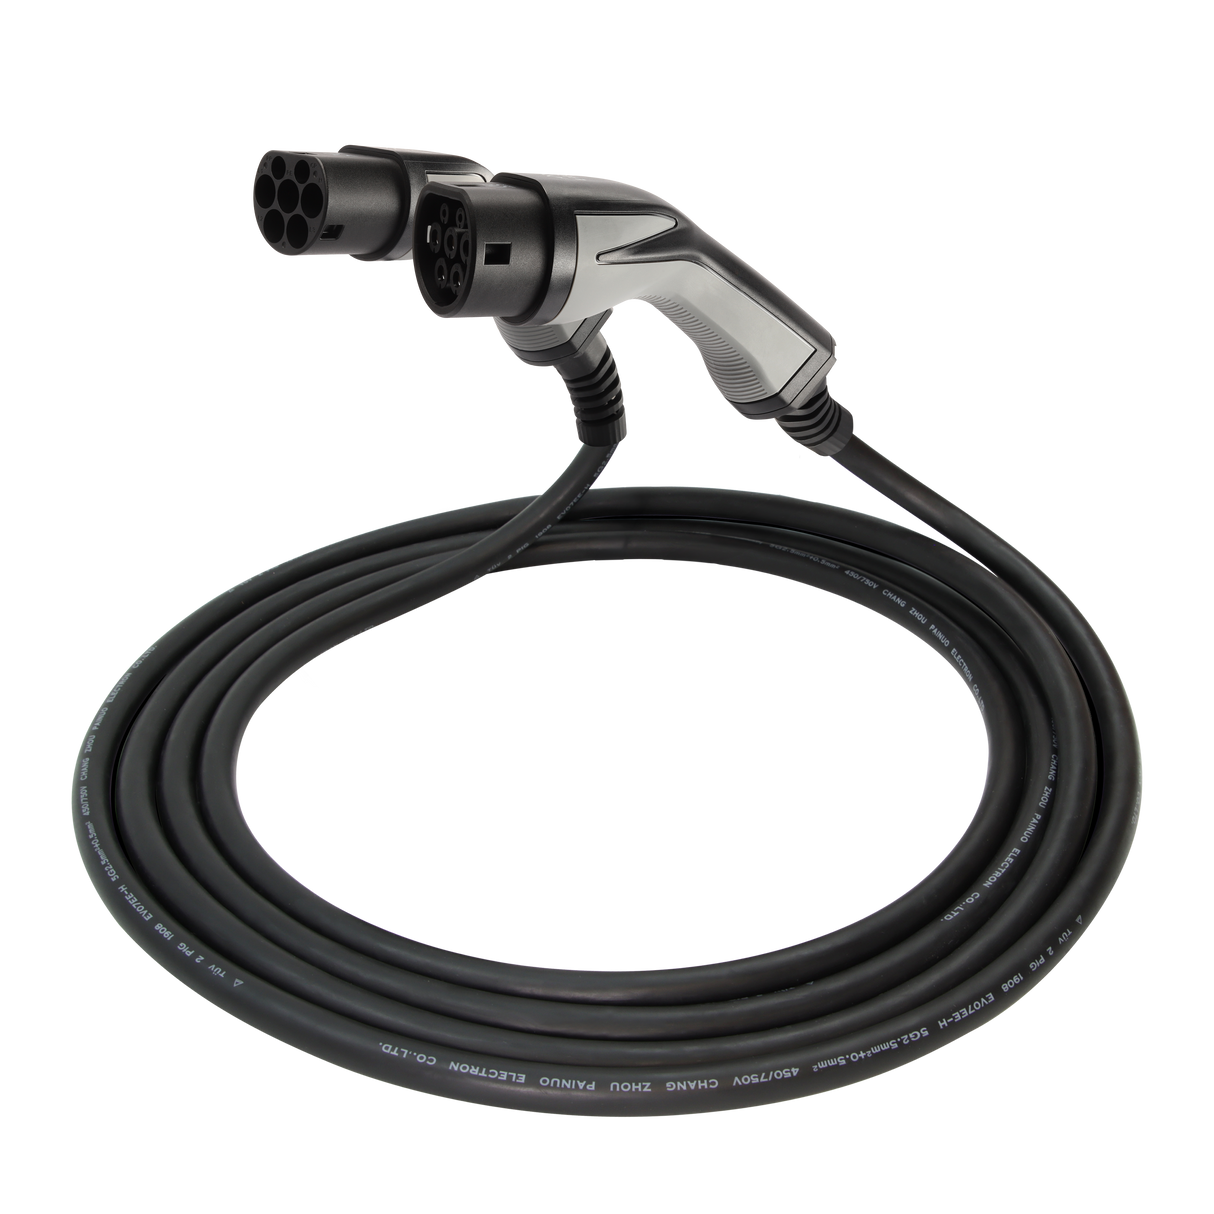 Charging cable Jaguar I -Pace - Erock Pro Type 2 - 16A 3 phase (11 kW)